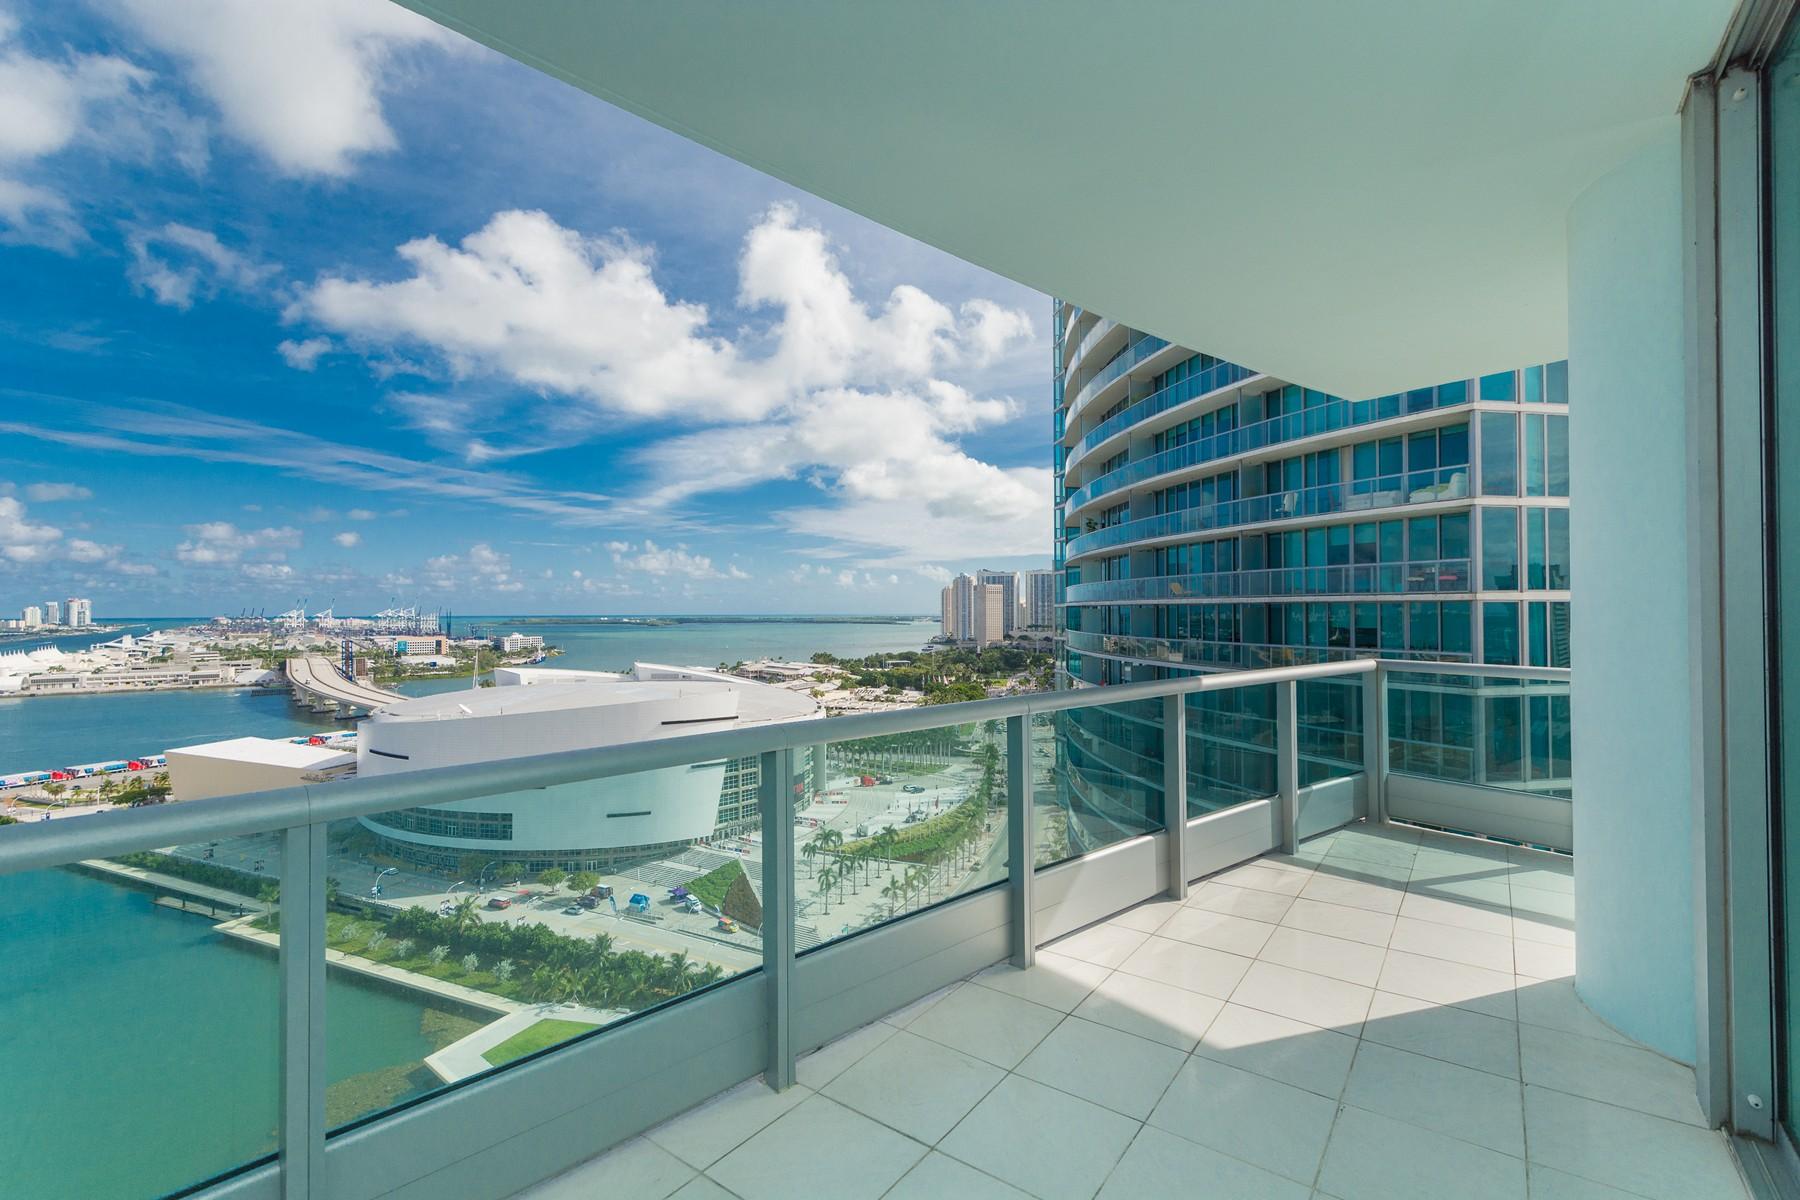 A downtown Miami condo balcony overseeing the bay and American Airlines Arena